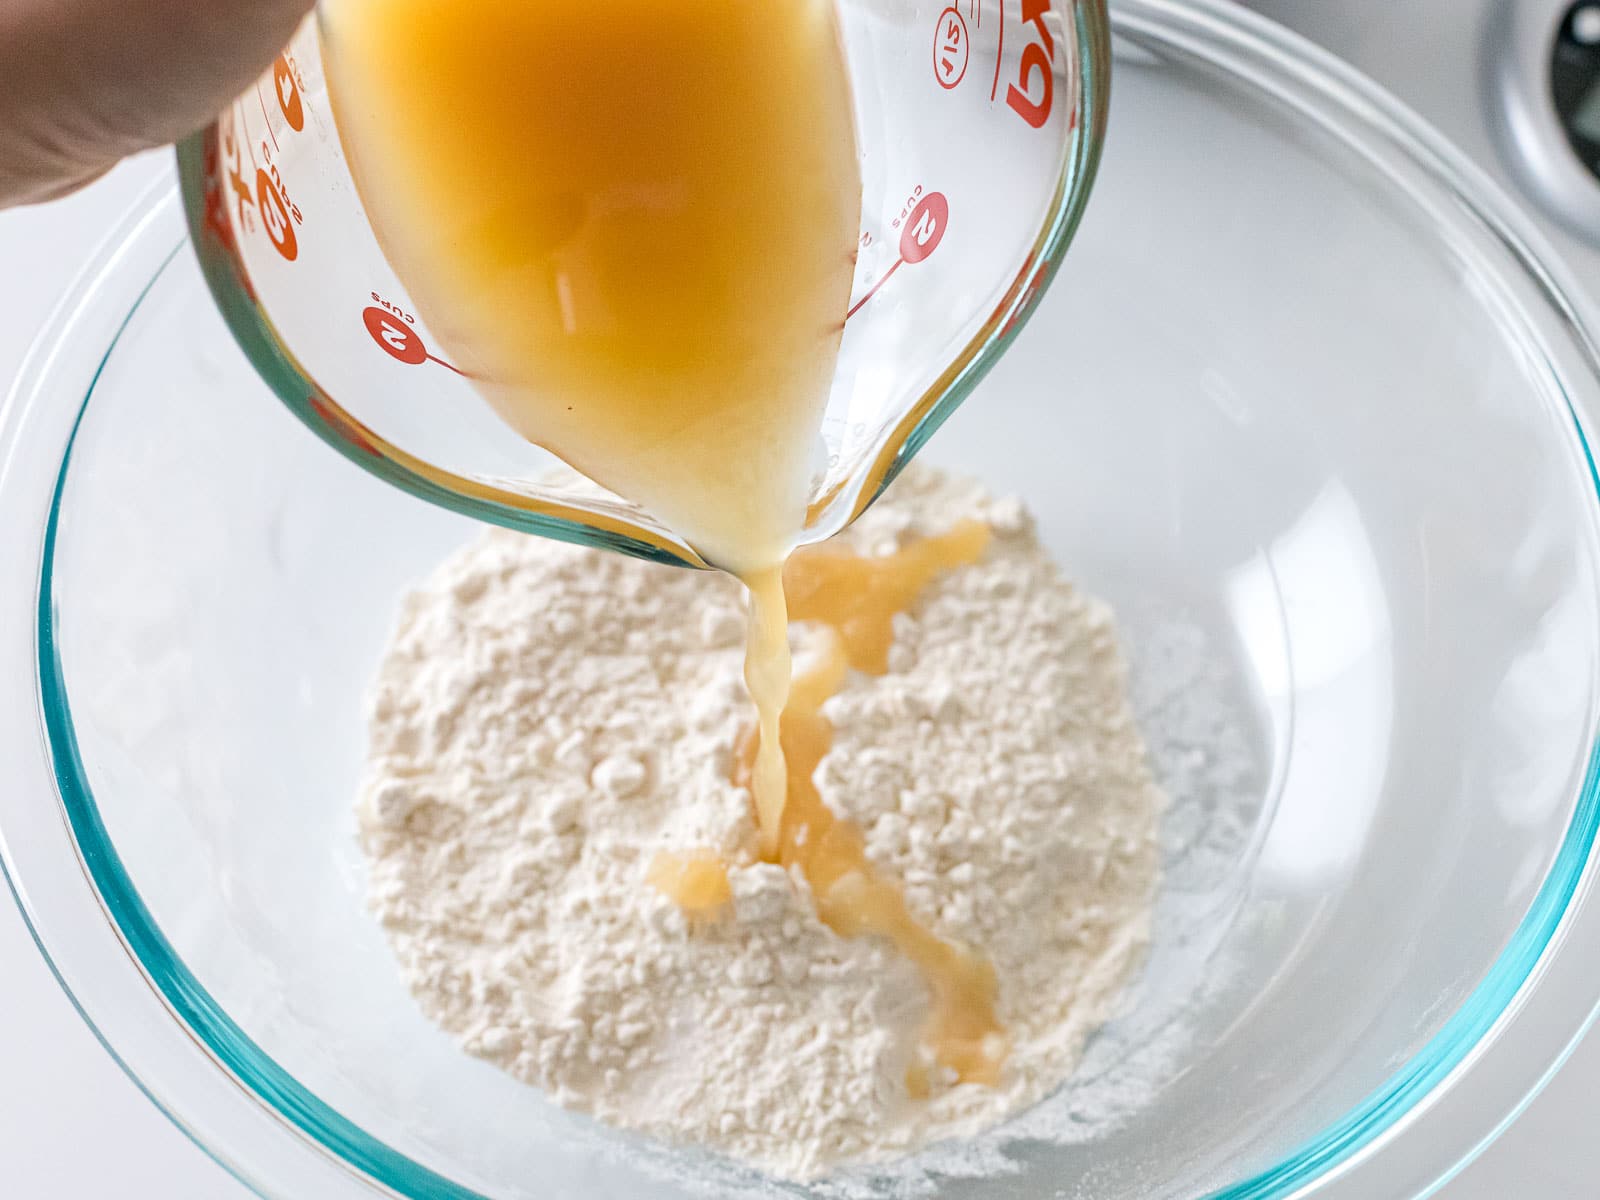 yeast water being poured into flour in a glass bowl